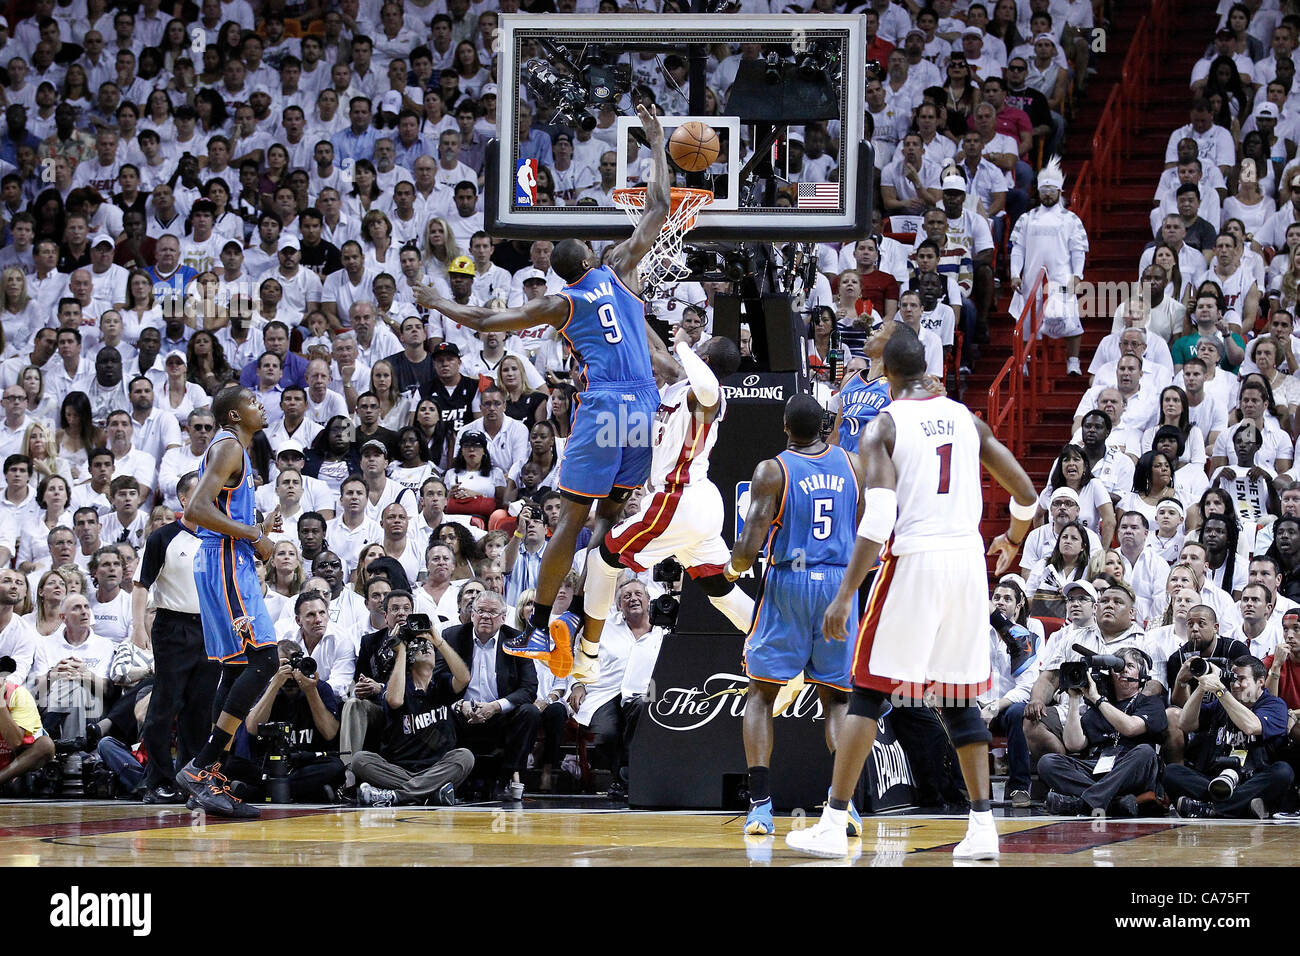 19.06.2012. Miami, Florida, USA.  Miami Heat shooting guard Dwyane Wade (3) is fouled by Oklahoma City Thunder power forward Serge Ibaka (9) during the first quarter of Game 4 of the 2012 NBA Finals, Thunder at Heat, at the American Airlines Arena, Miami, Florida, USA. Stock Photo